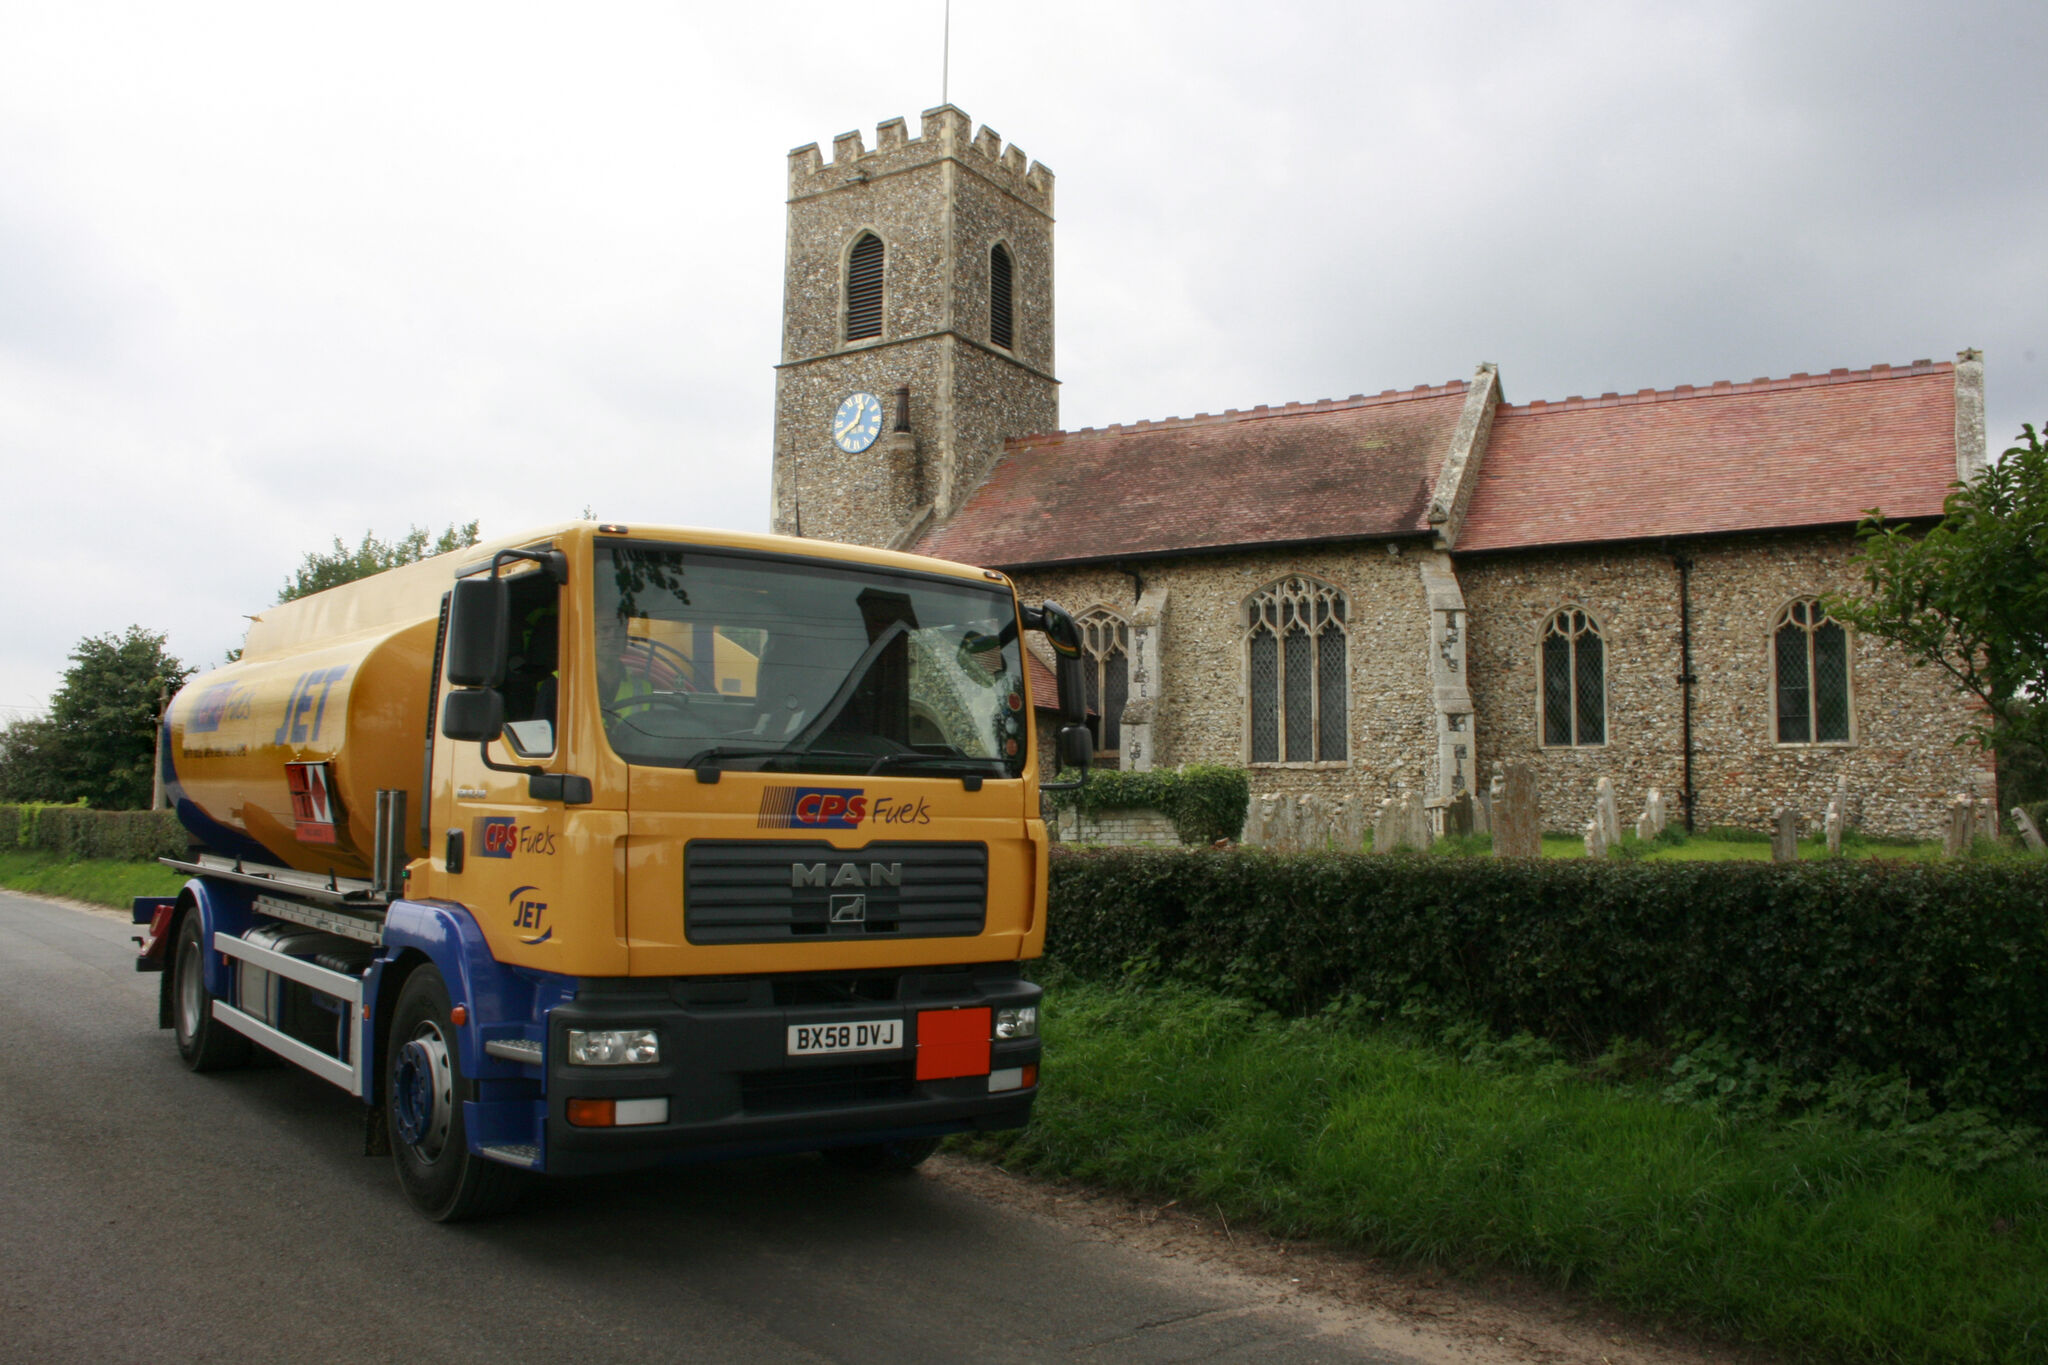 Tanker by the Church